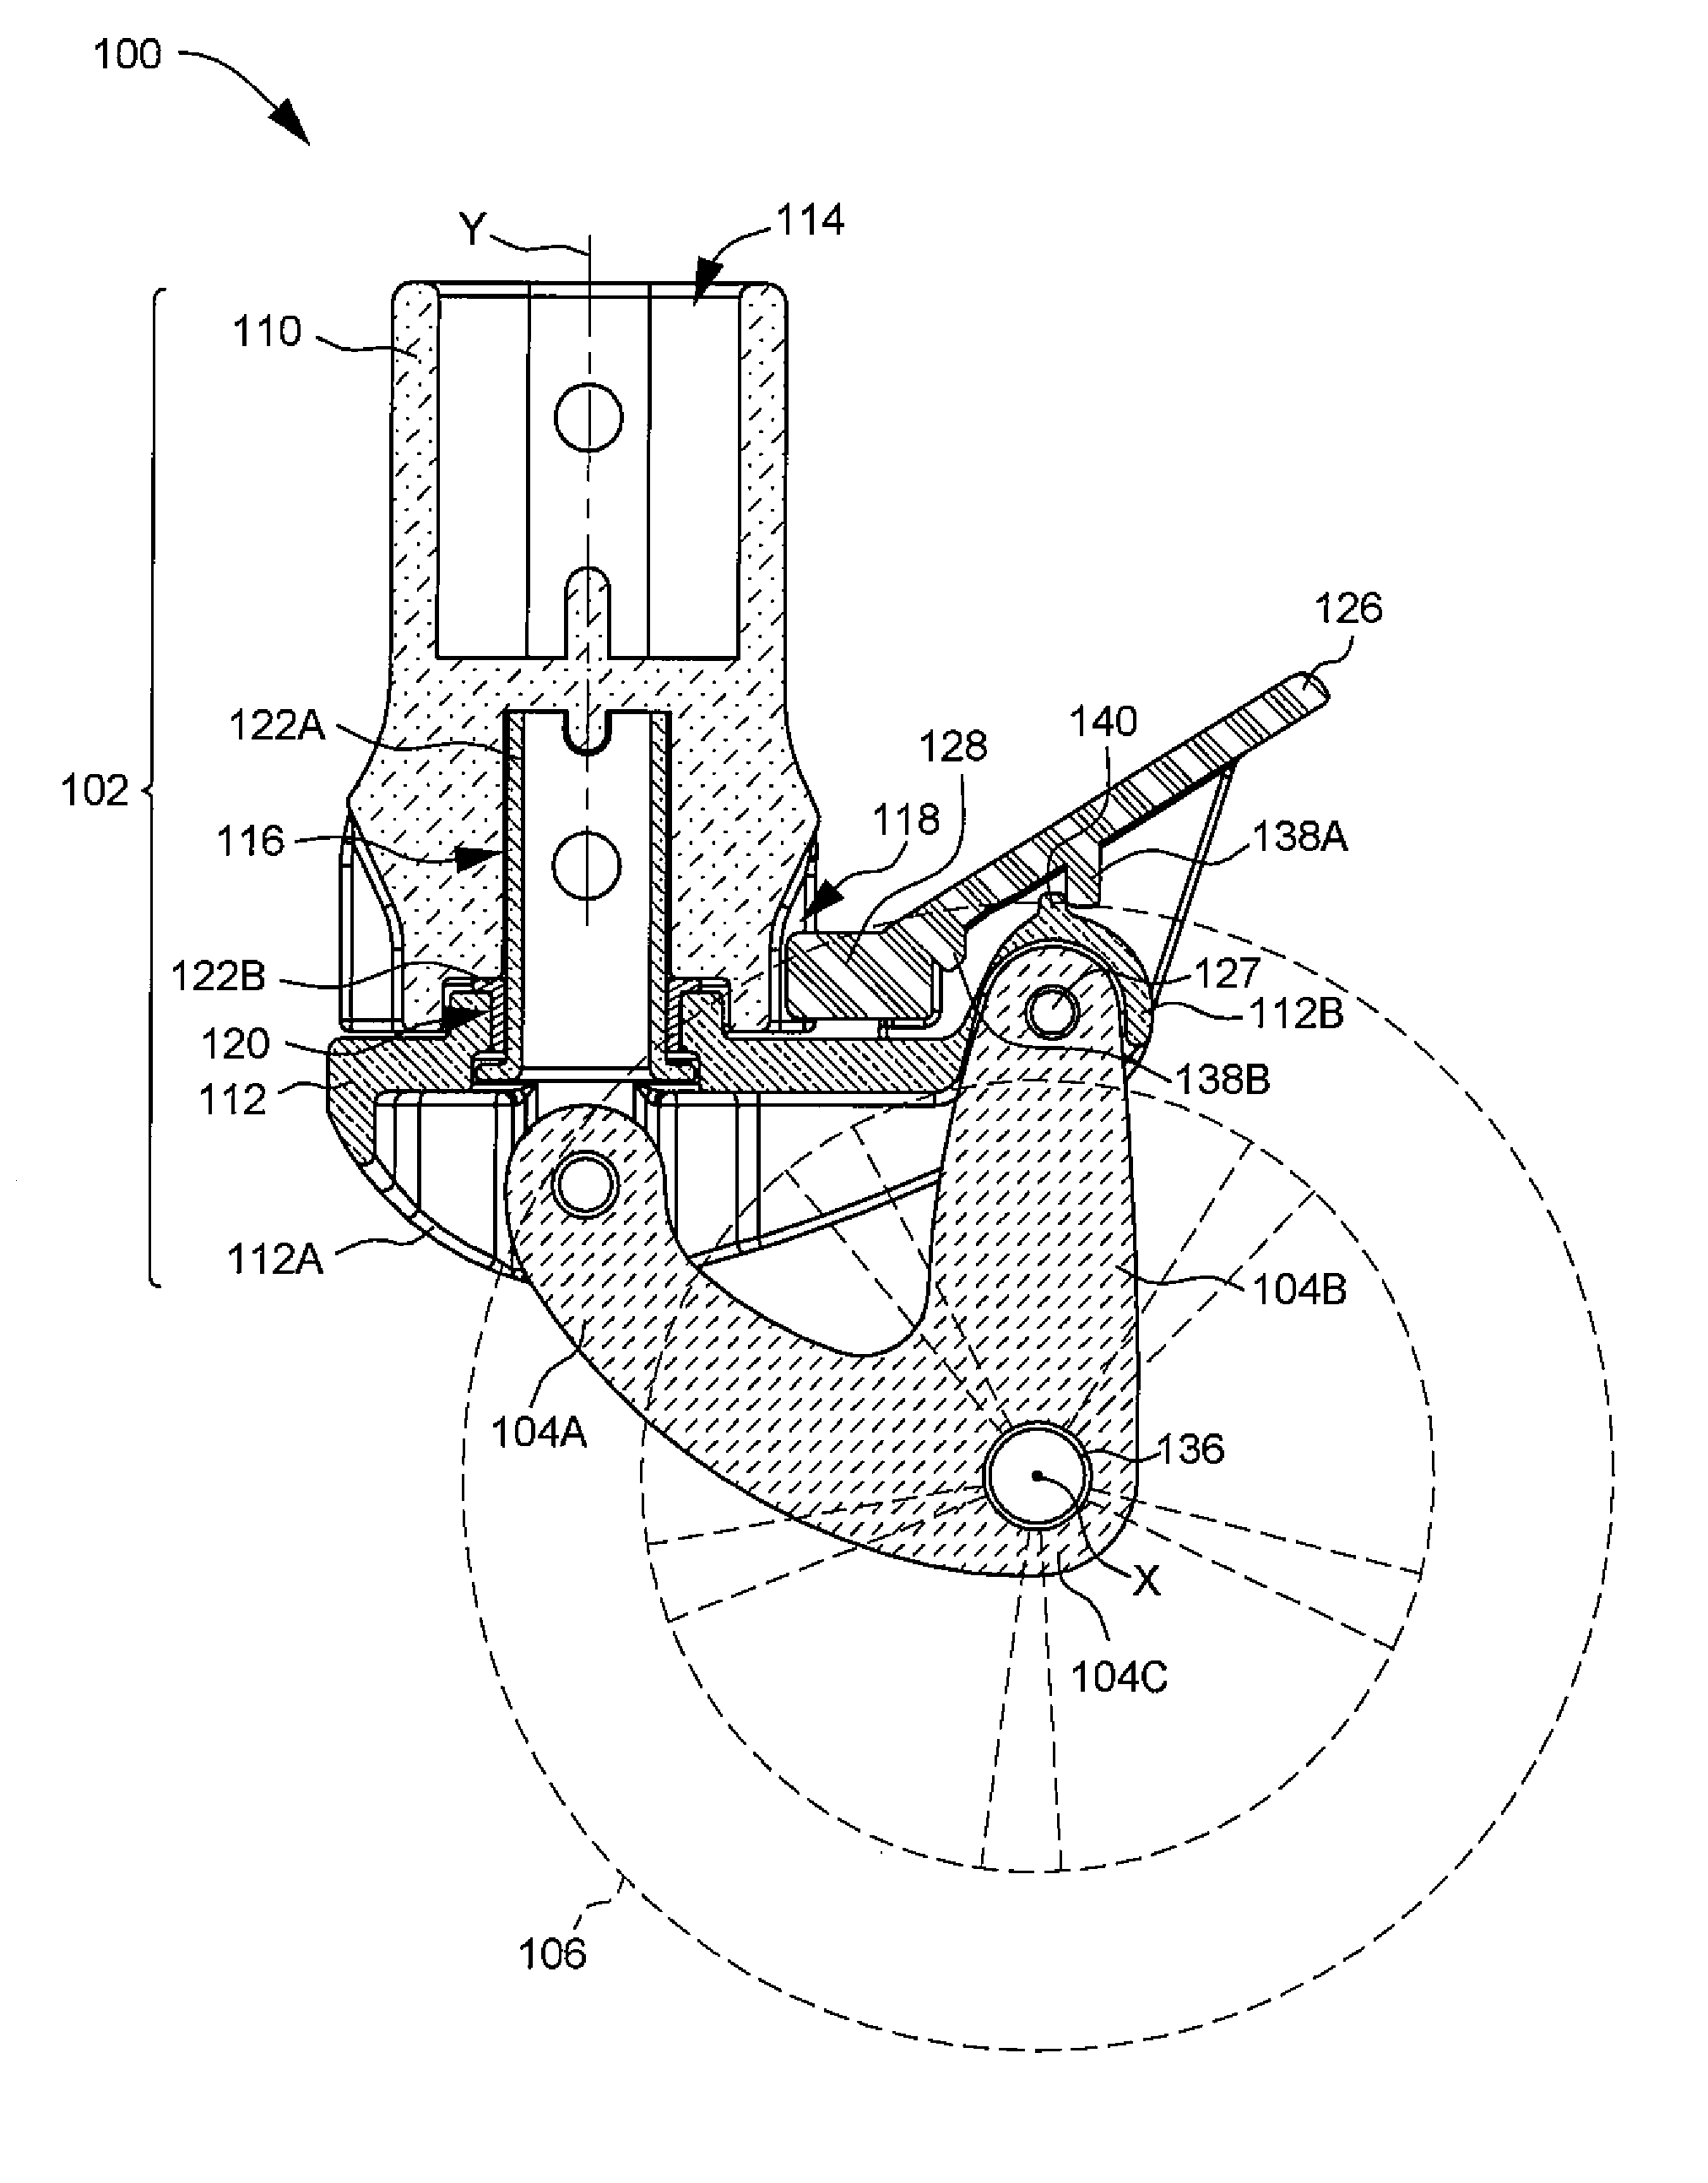 Wheel assembly for an infant carrier apparatus